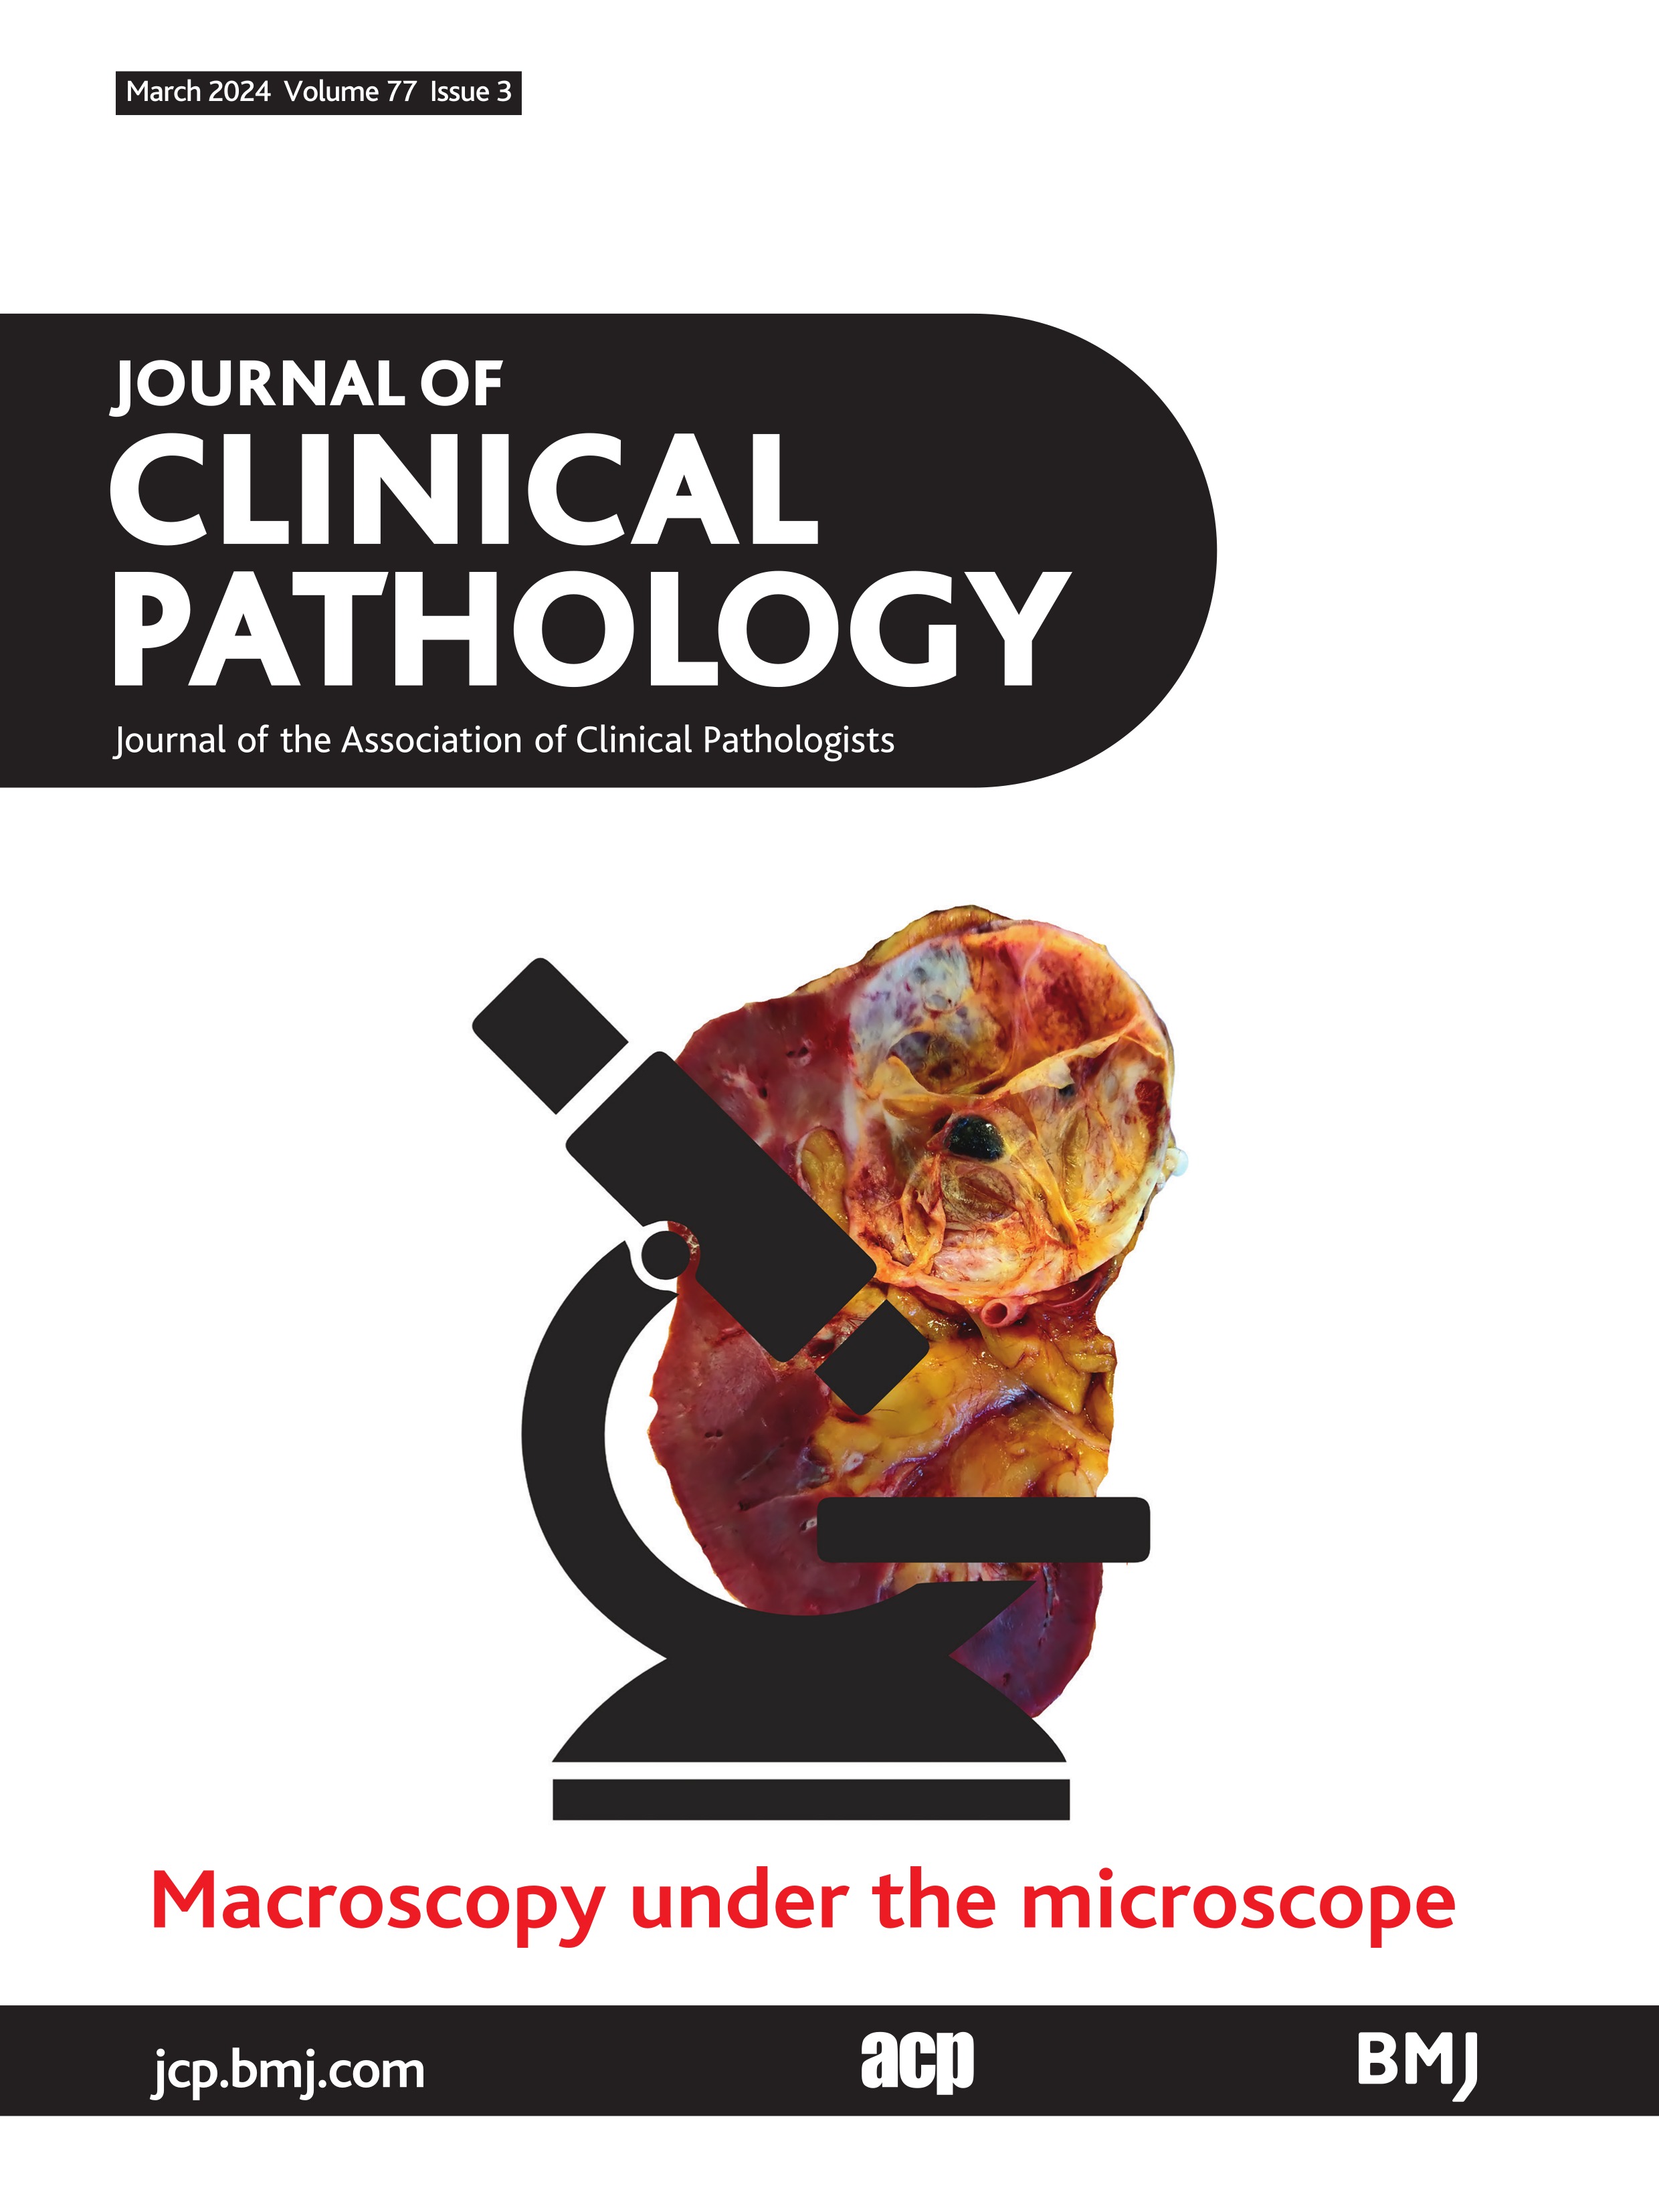 Macroscopic pathology and all that: a personal view